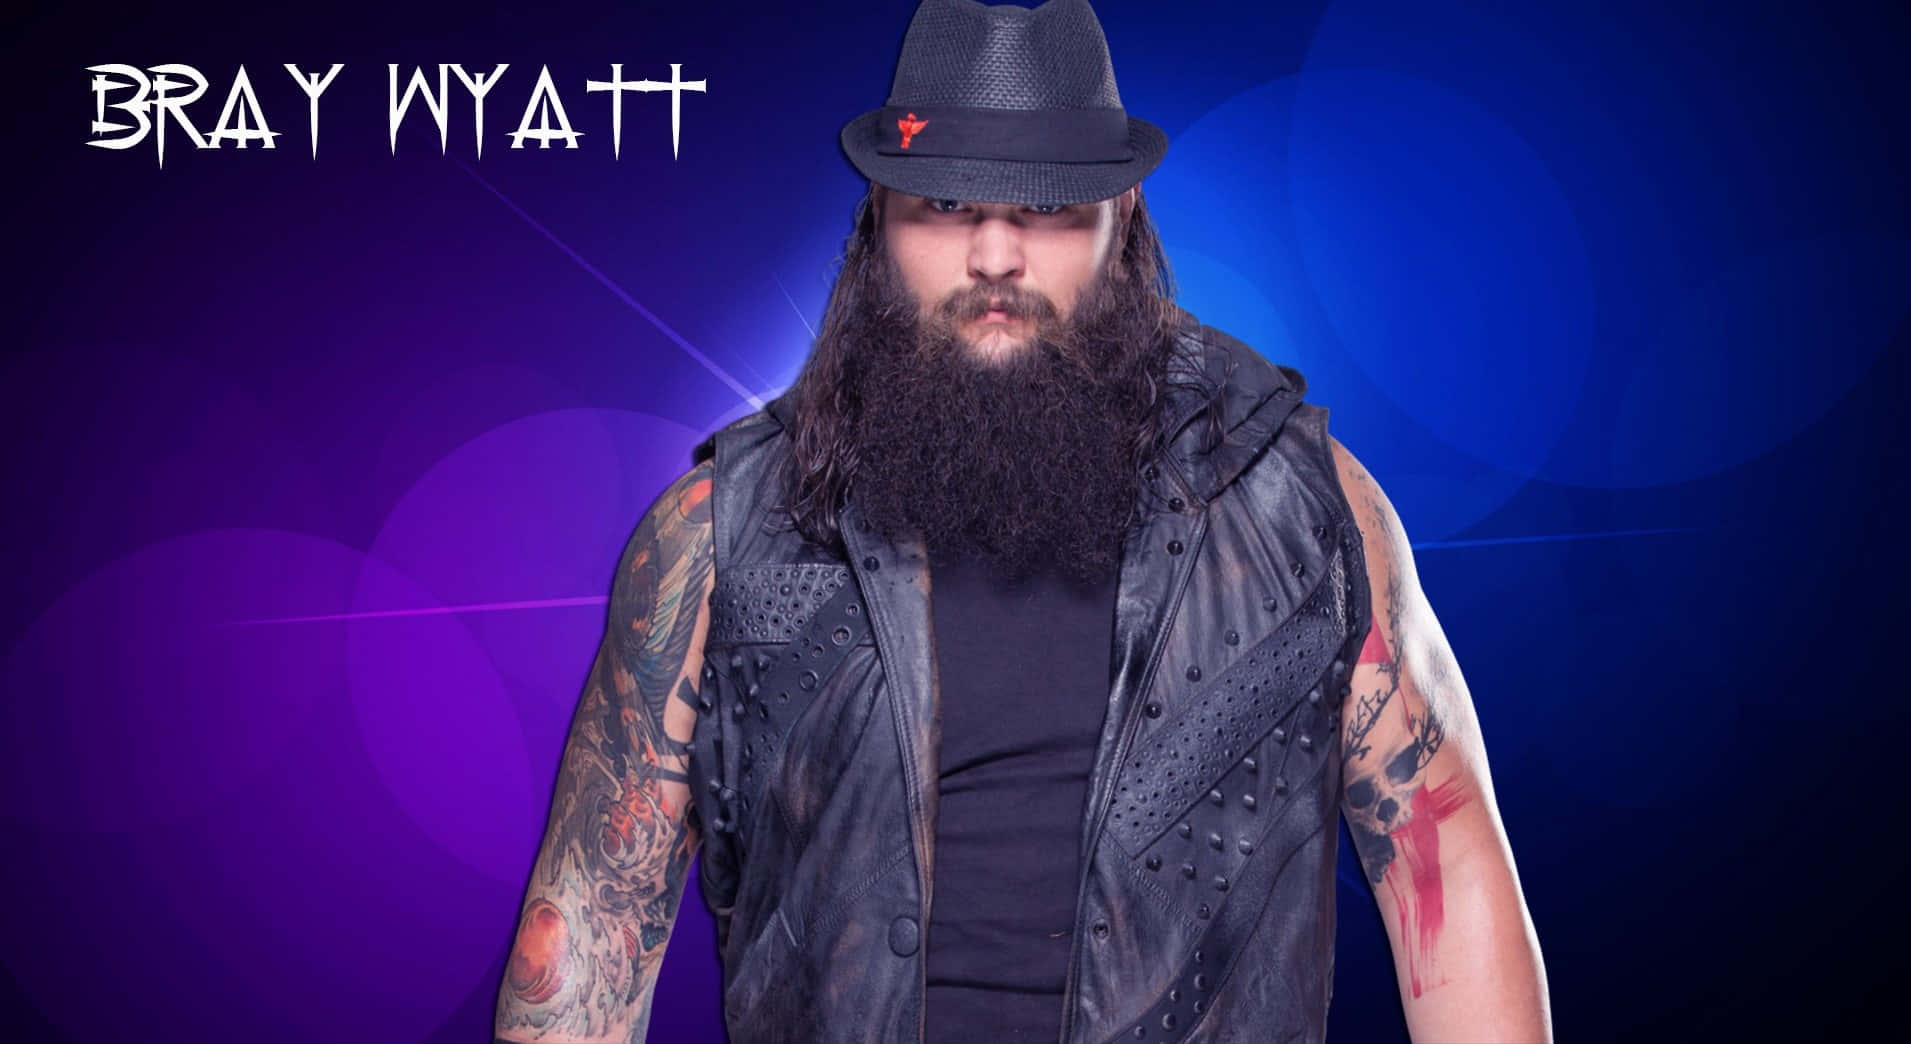 Bray Wyatt posing in his iconic style at WWE Wallpaper